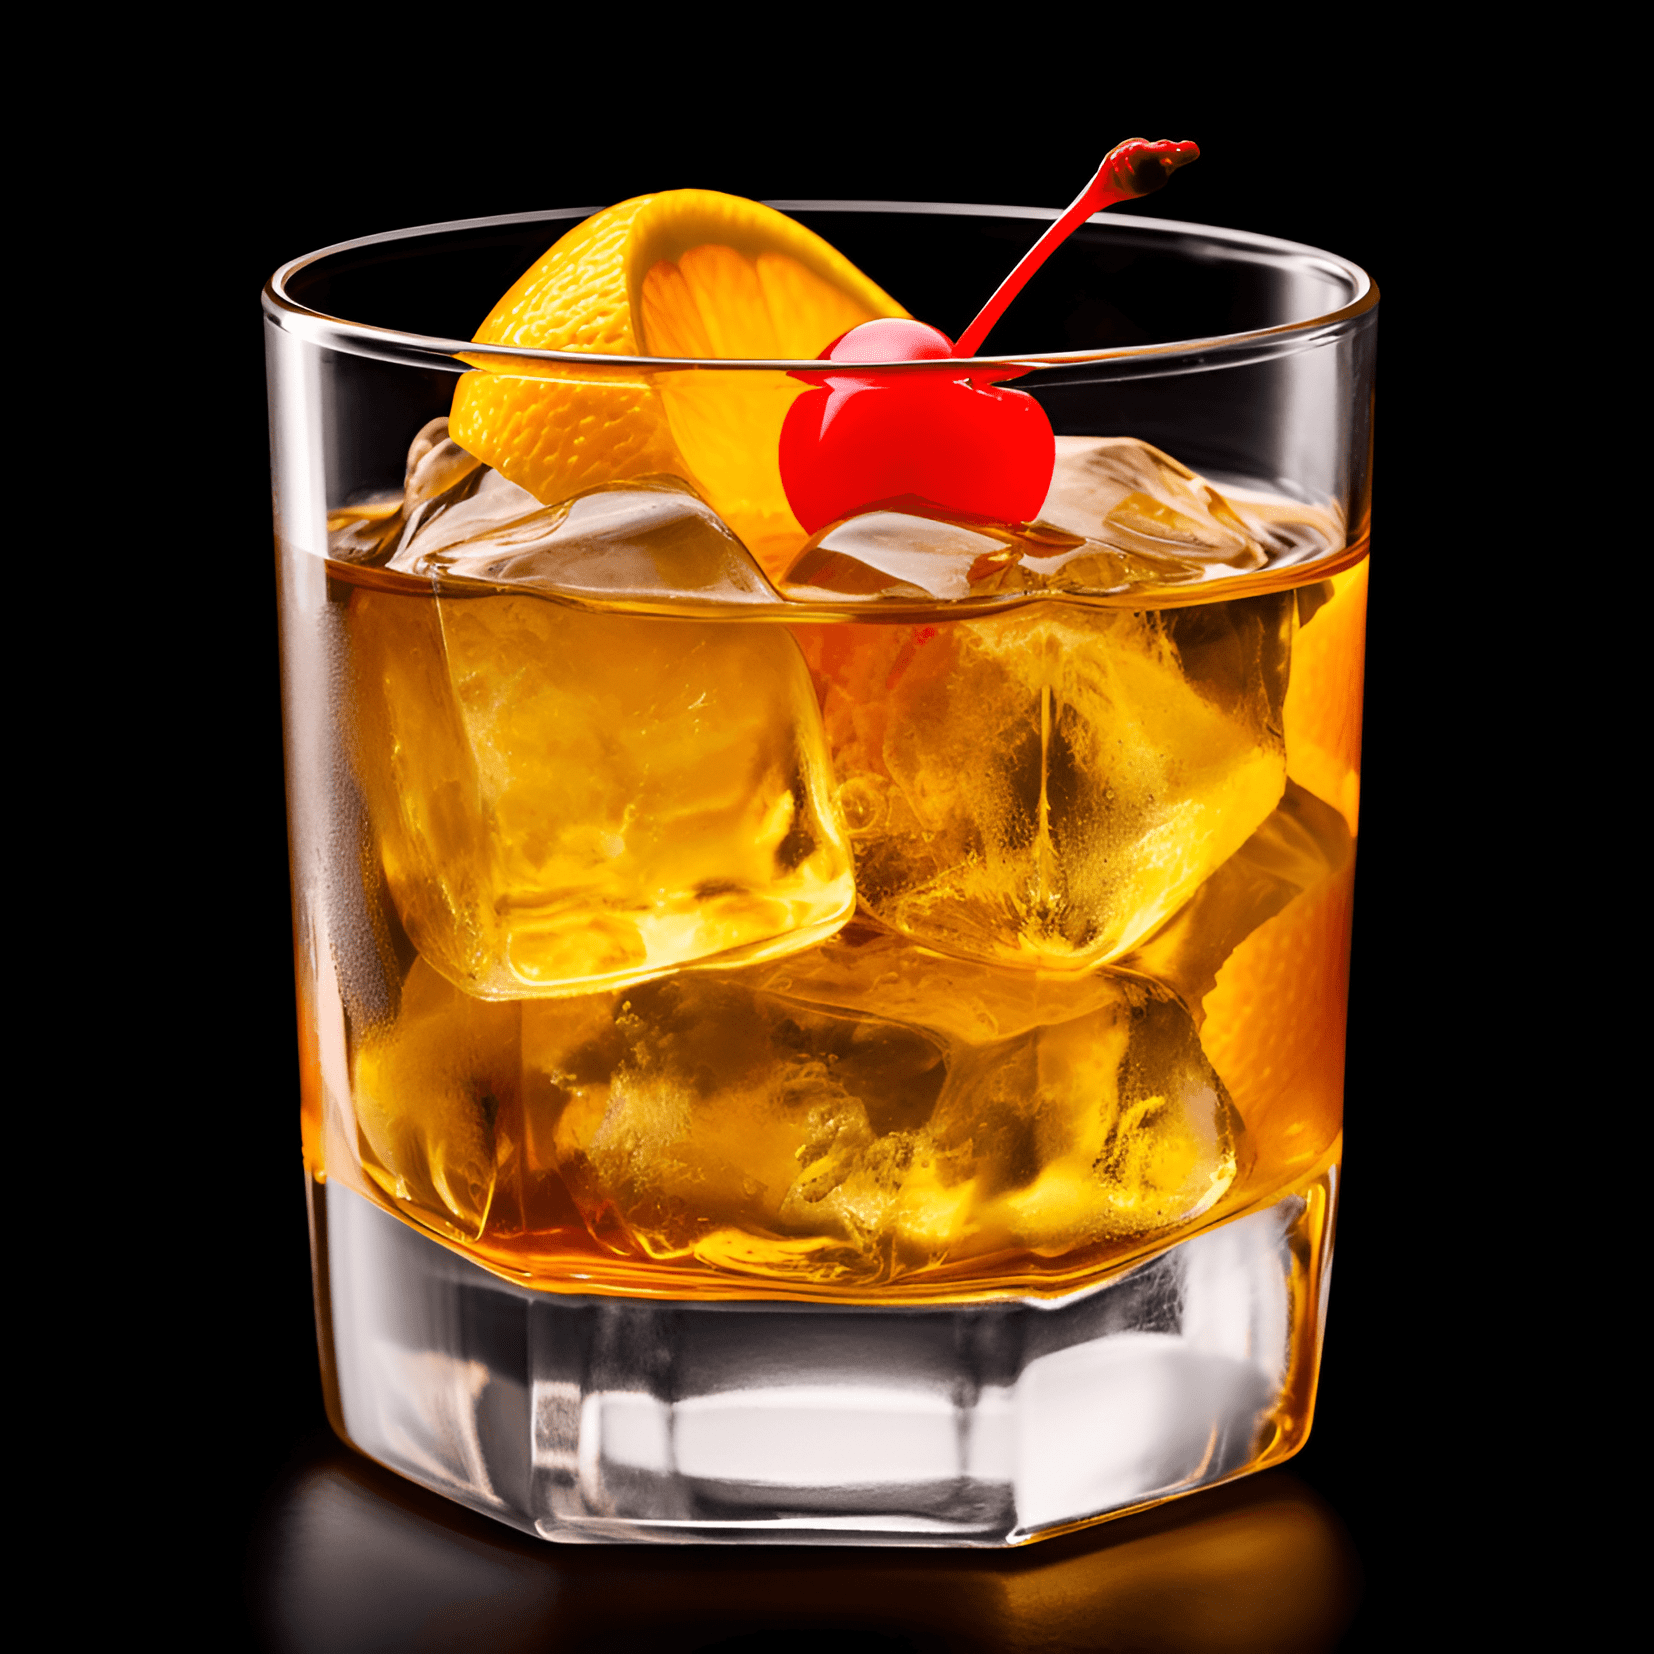 Southern Comfort Cocktail Recipe - The Southern Comfort cocktail has a sweet and fruity taste with a hint of spice. It is smooth, warming, and has a full-bodied flavor that is both rich and satisfying.